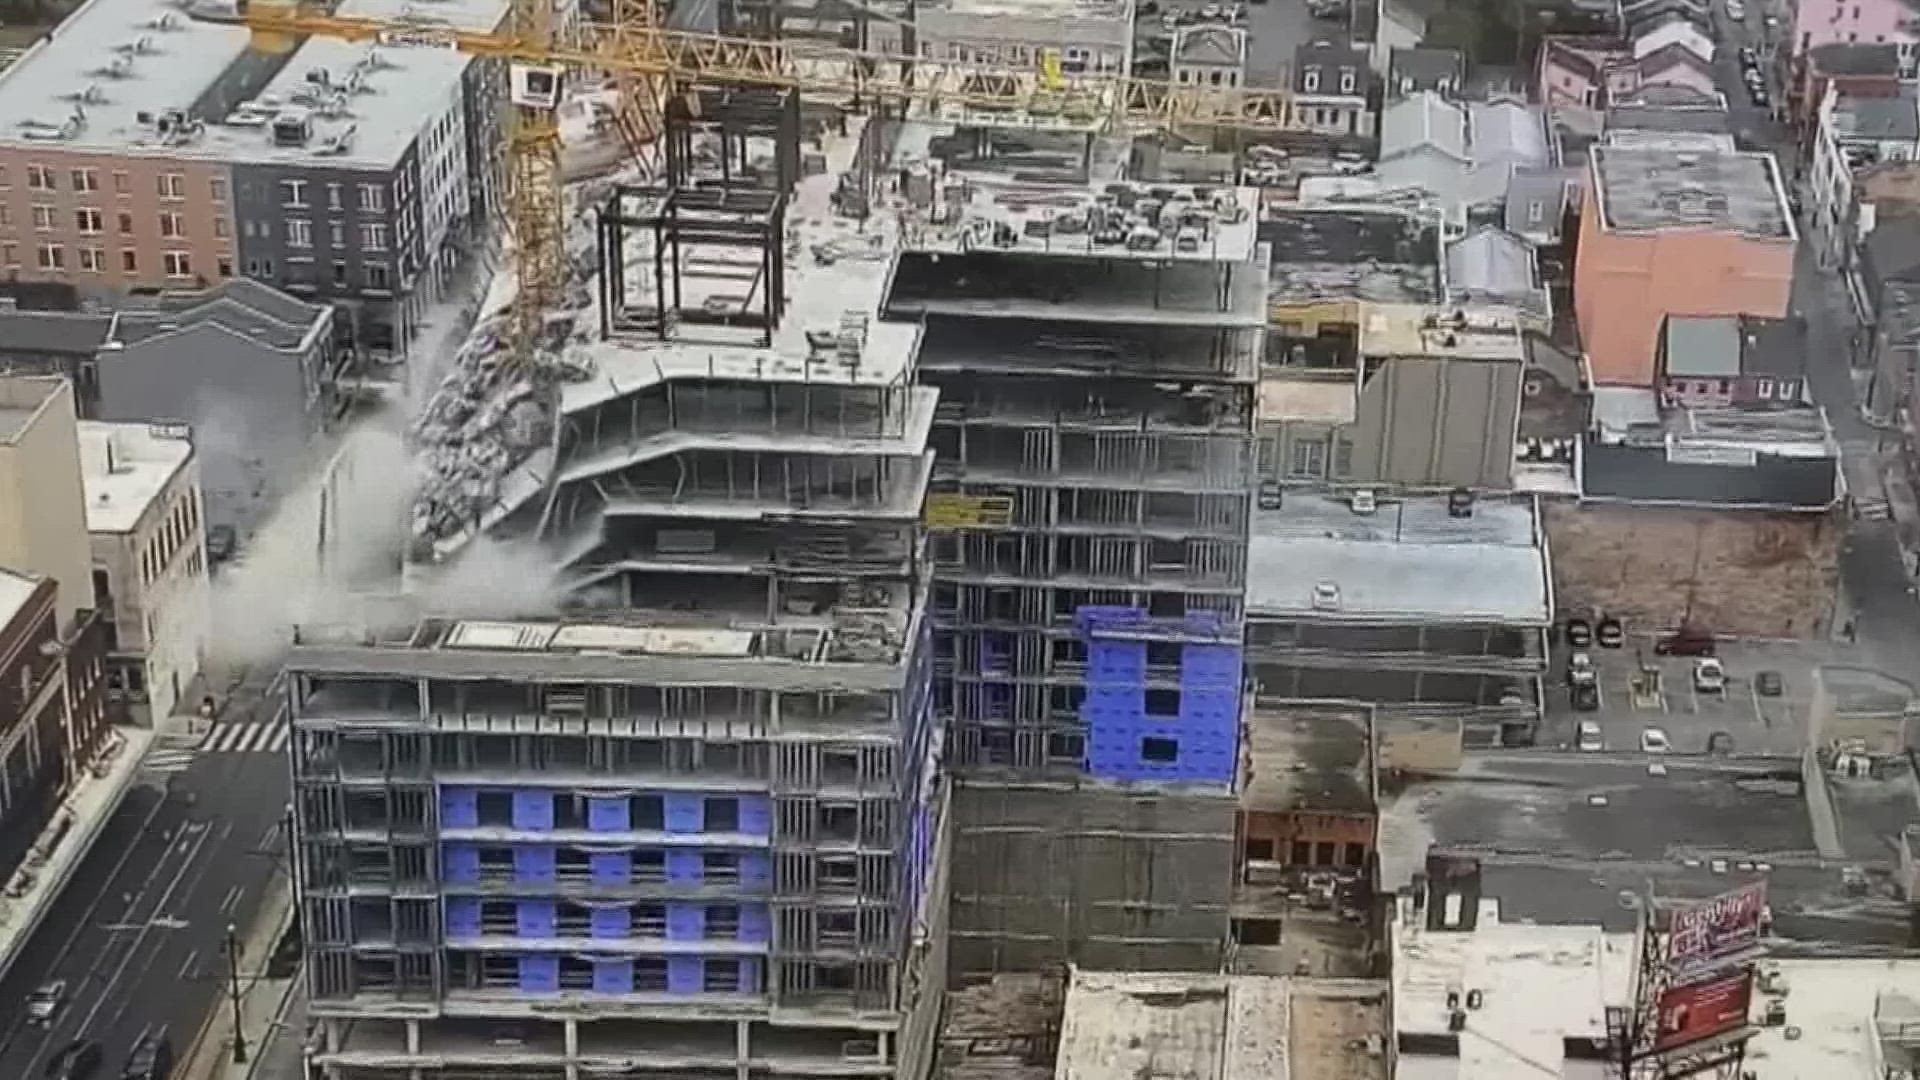 Two years after the Hard Rock collapse questions are still being asked about what happened.